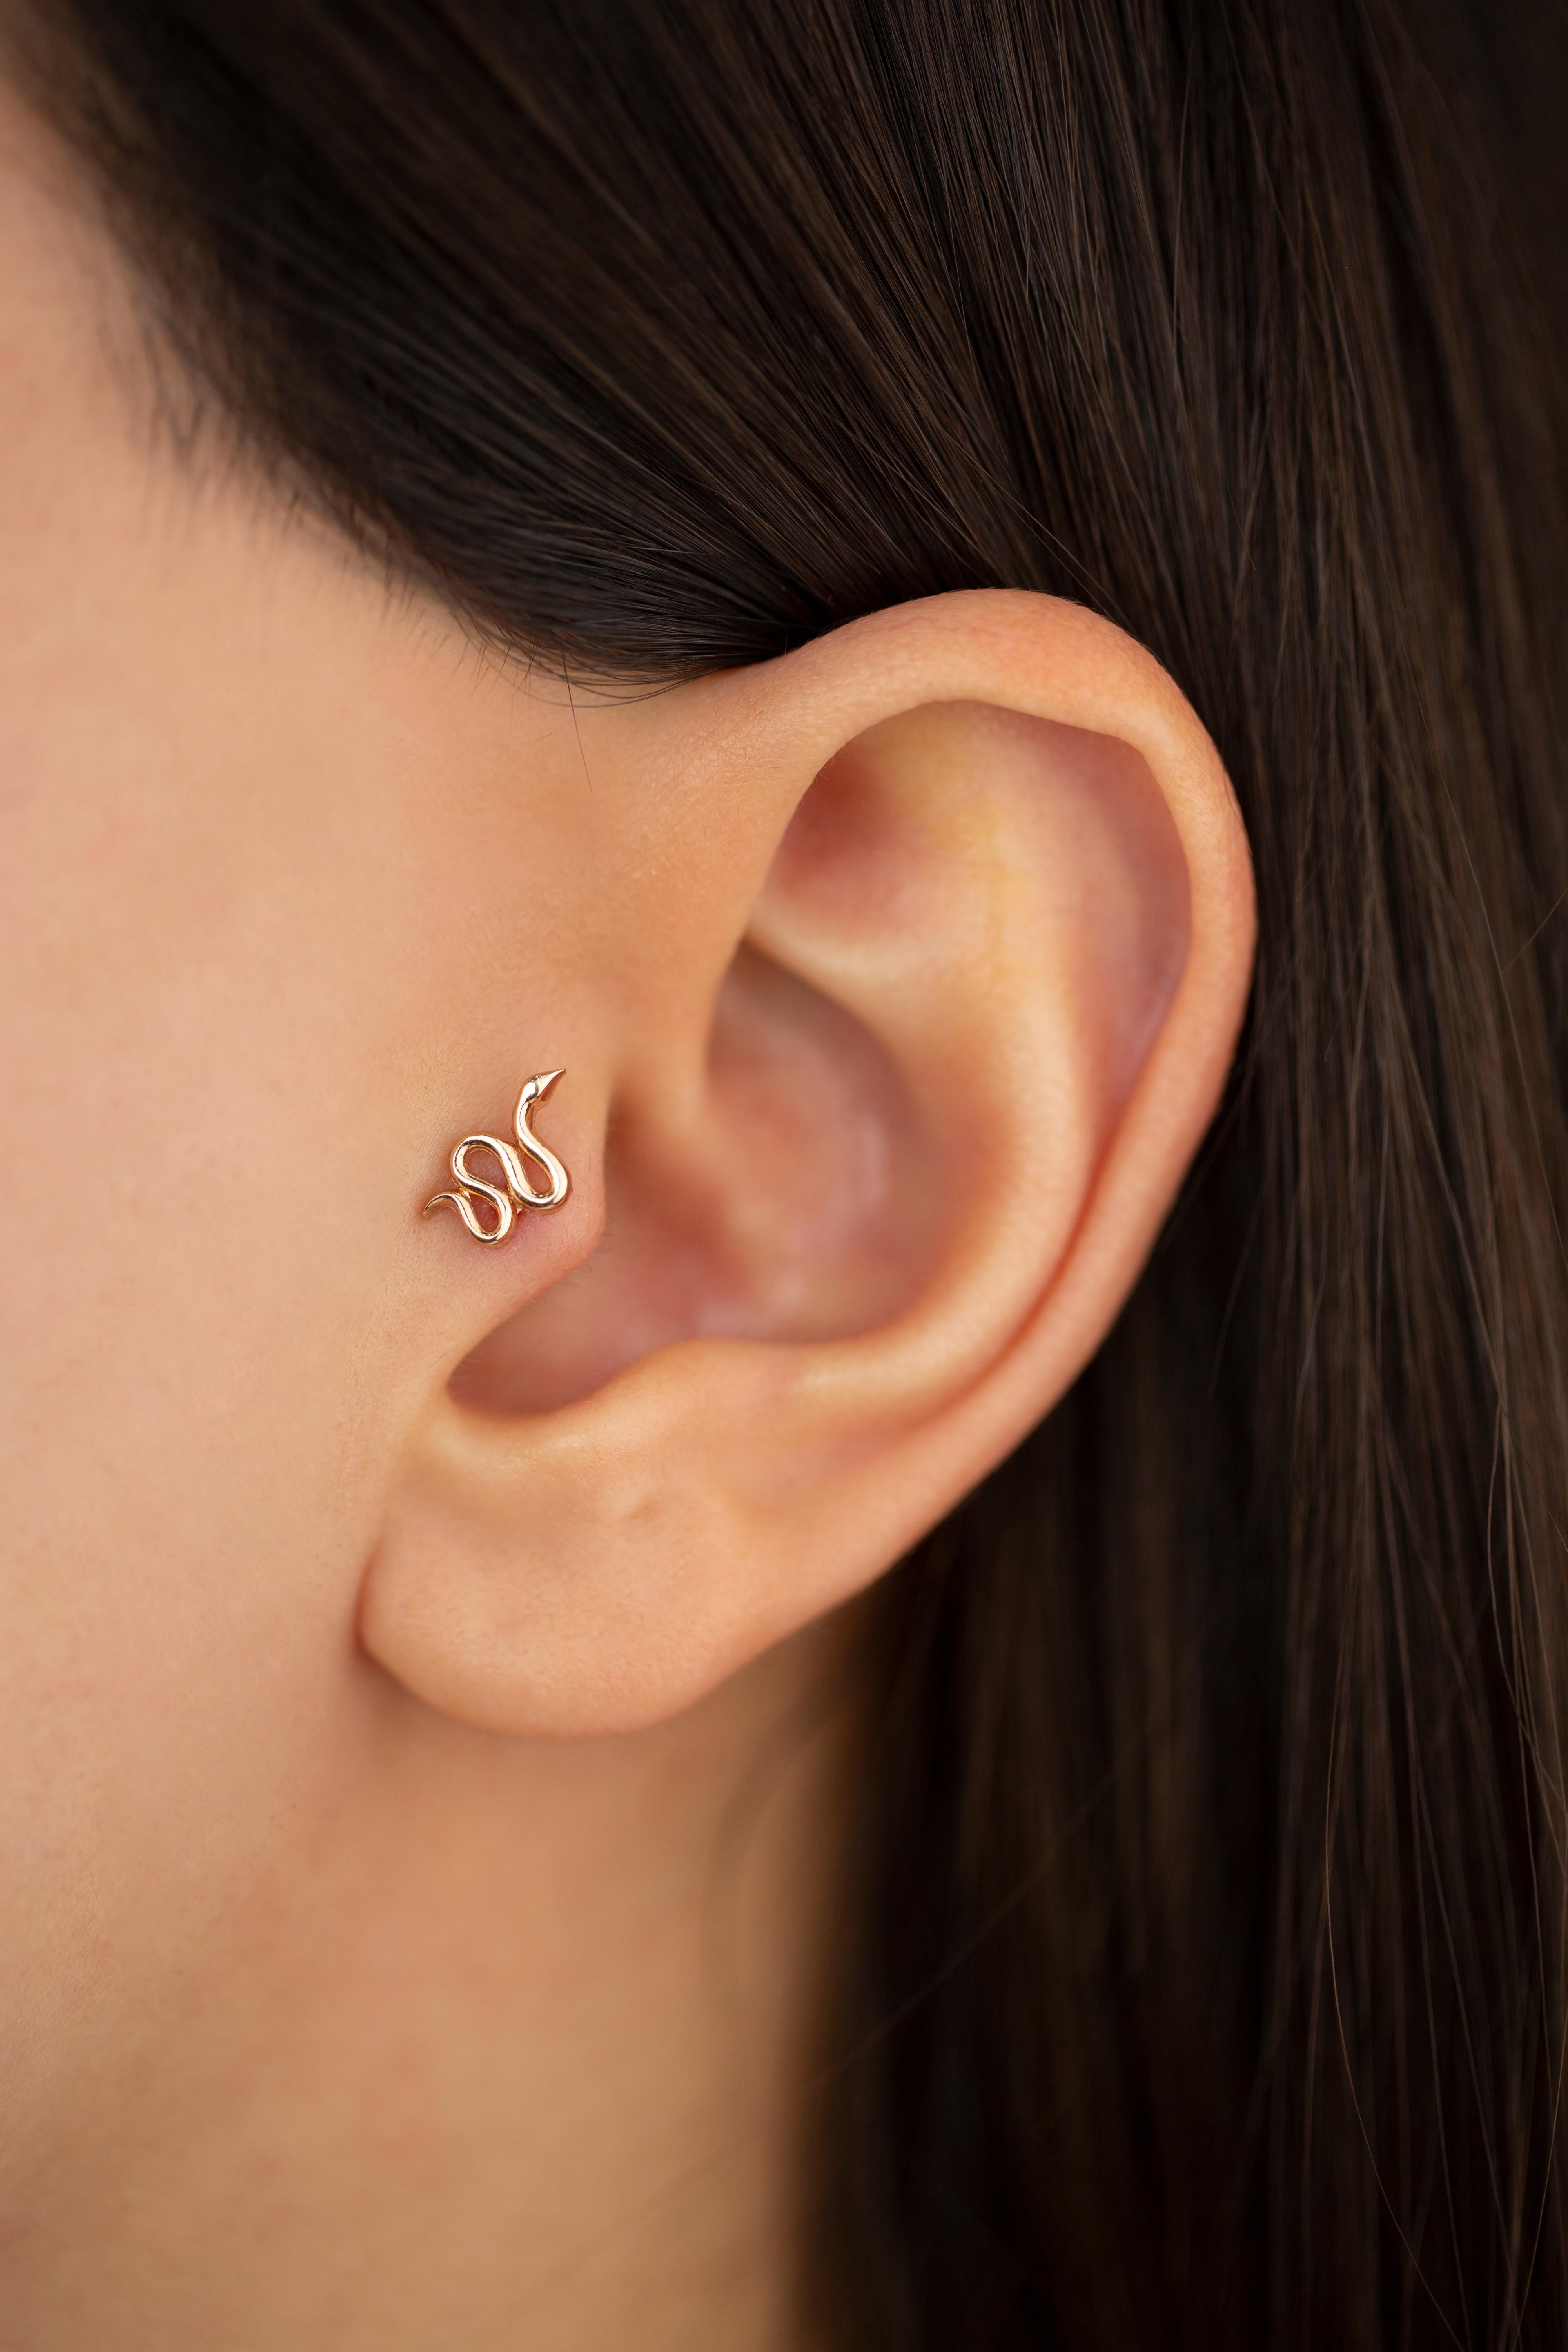 14K Rose Gold Snake Piercing, Rose Gold Stud Snake Earring

You can use the piercing as an earring too! Also this piercing is suitable for tragus, nose, helix, lobe, flat, medusa, monreo, labret and stud.

This piercing was made with quality